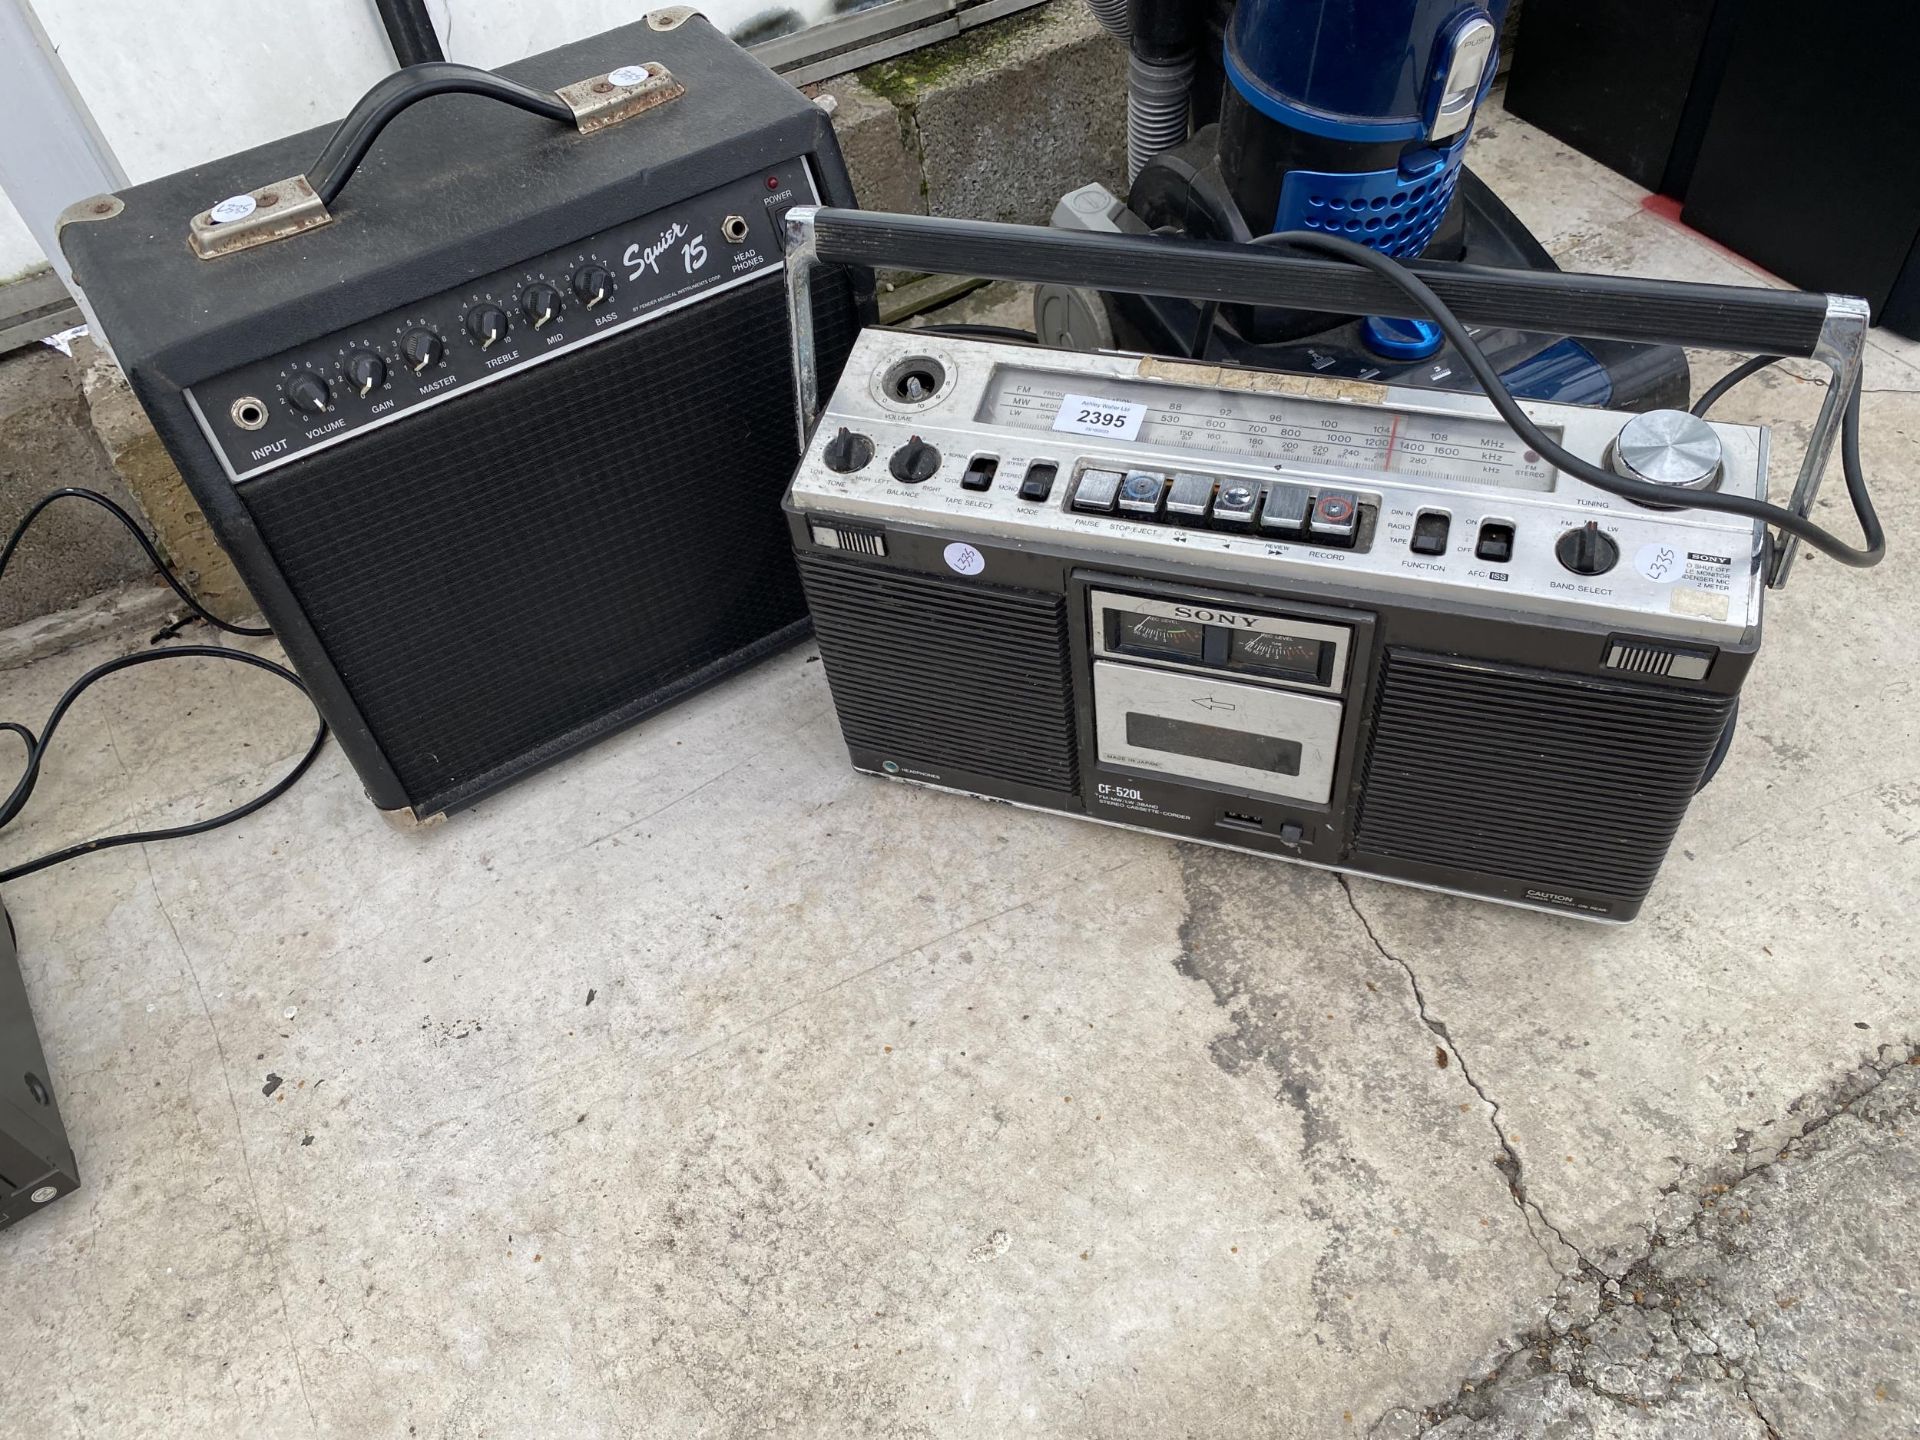 A RETRO SONY RADIO AND A SQUIRE 15 AMPLIFIER